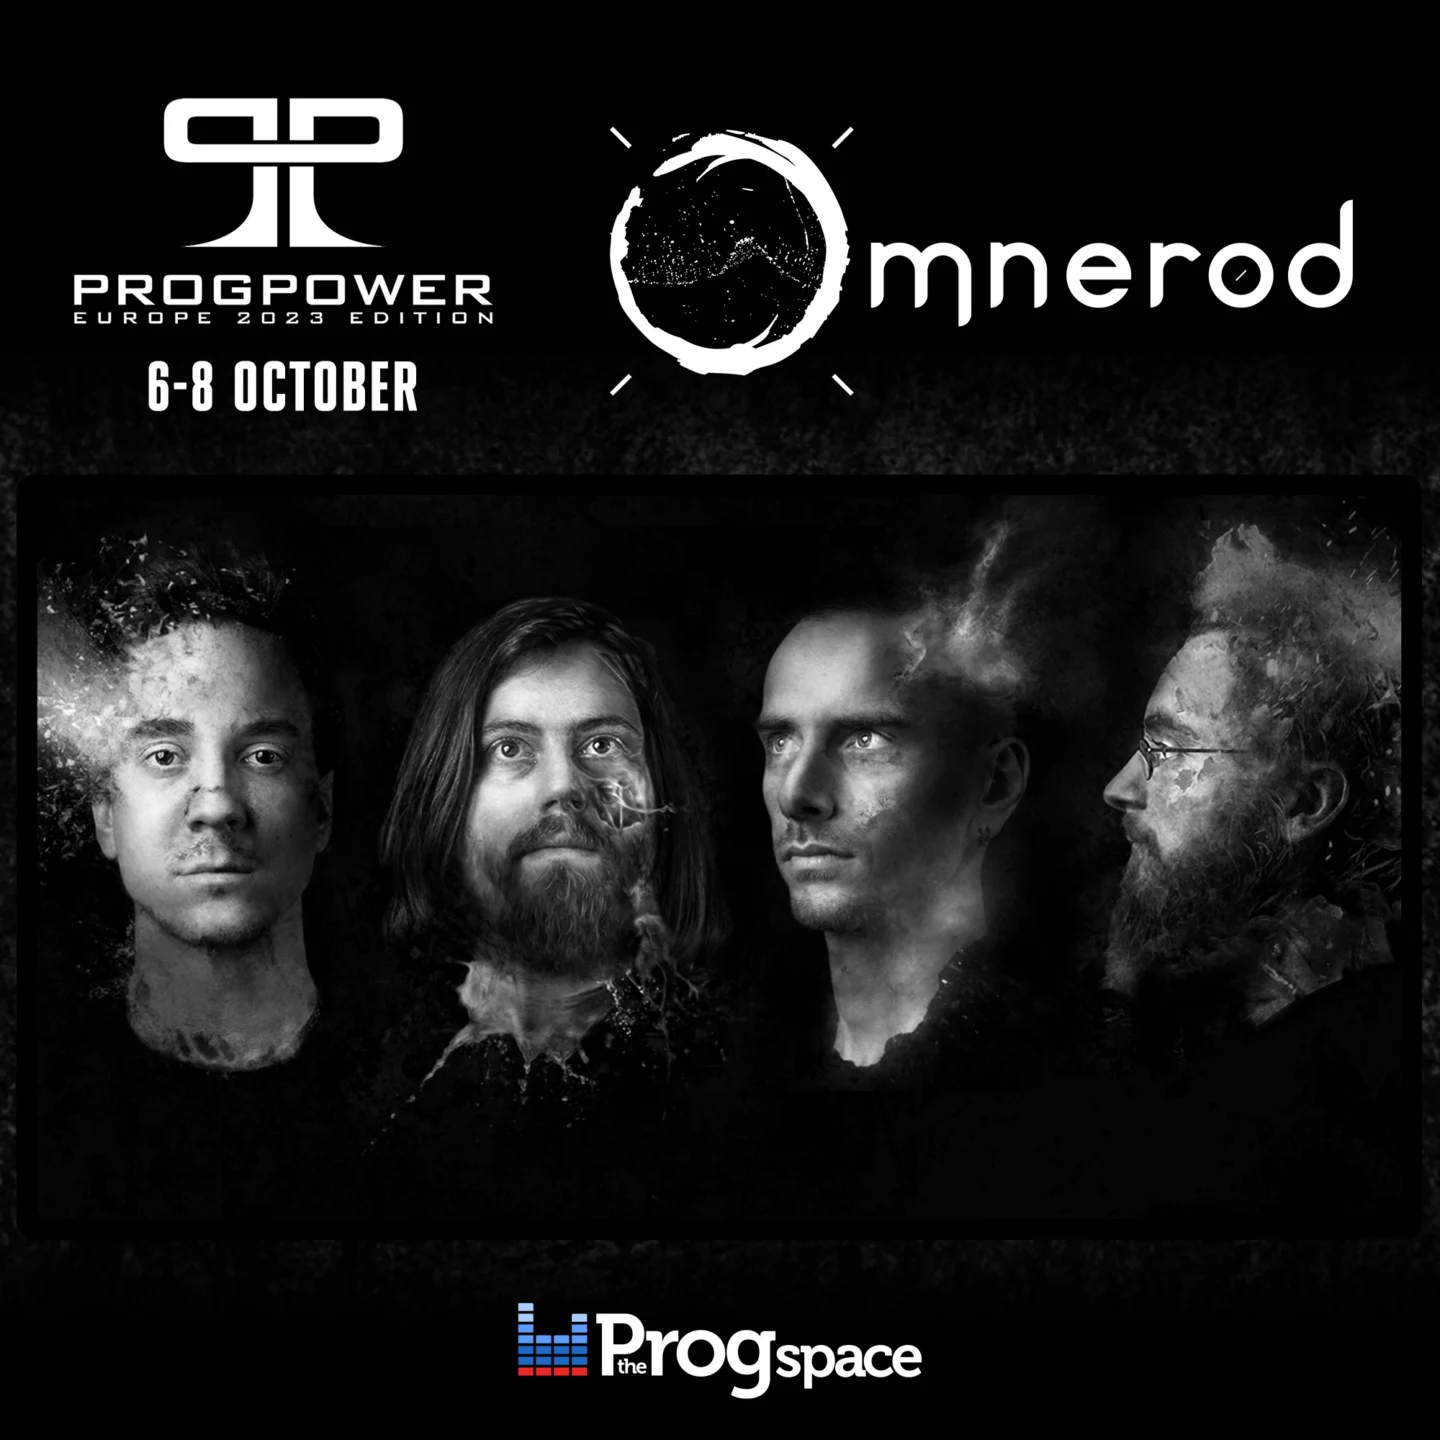 Omnerod is the 9th band to play at ProgPower Europe 2023!